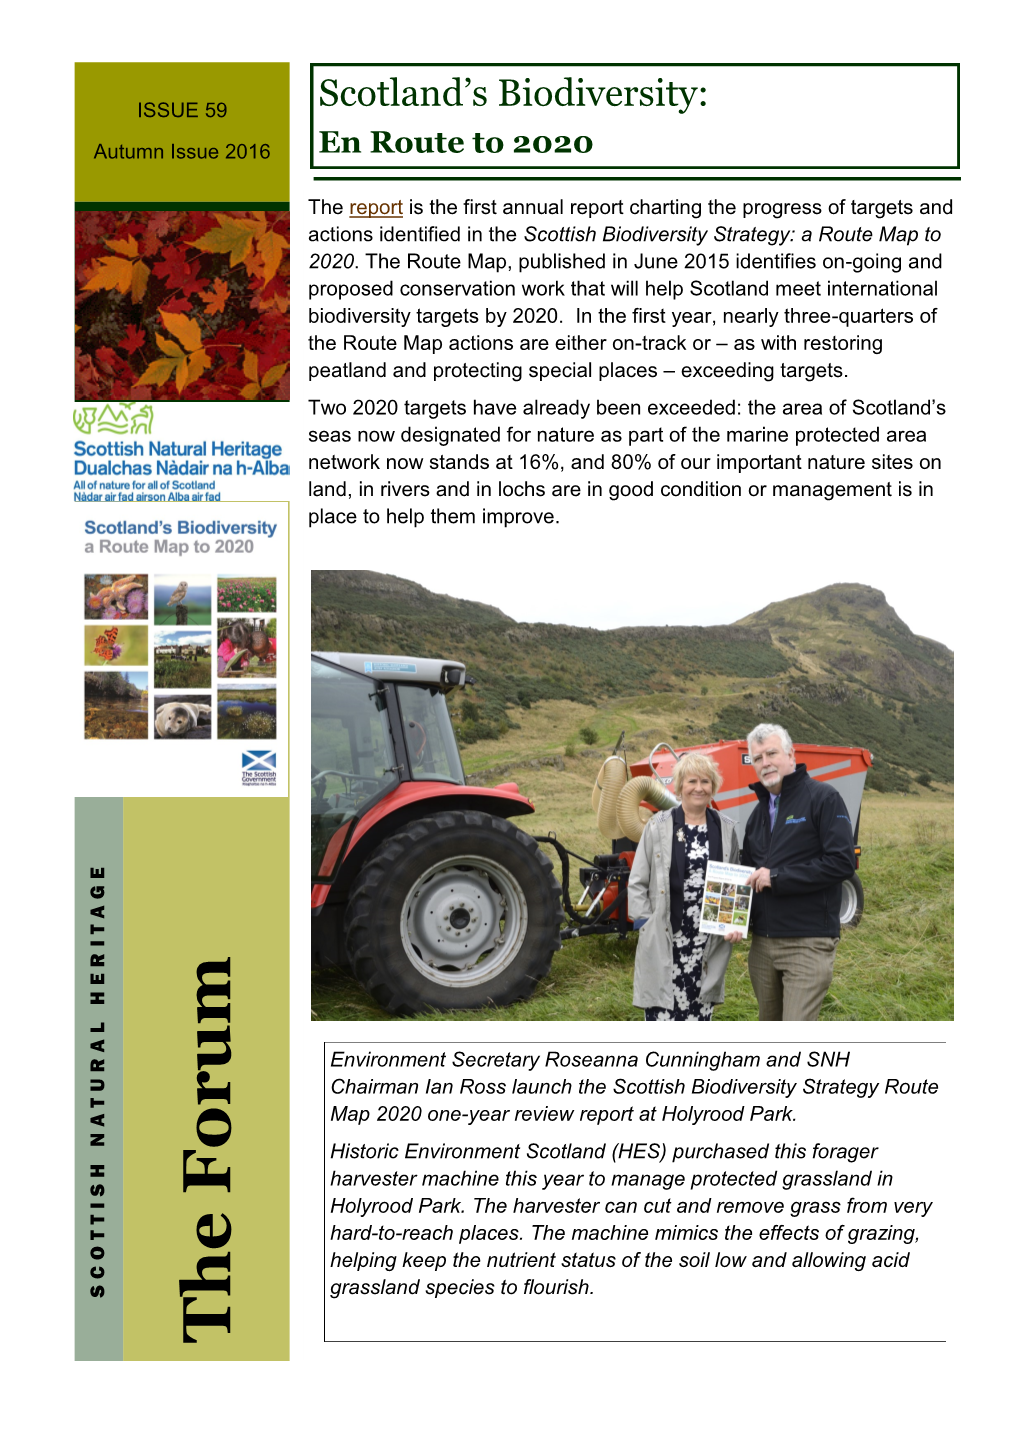 The Forum Issue 59 Autumn Issue 2016 SCOTTISH NATURAL HER ITAGE I Contents & Contacts